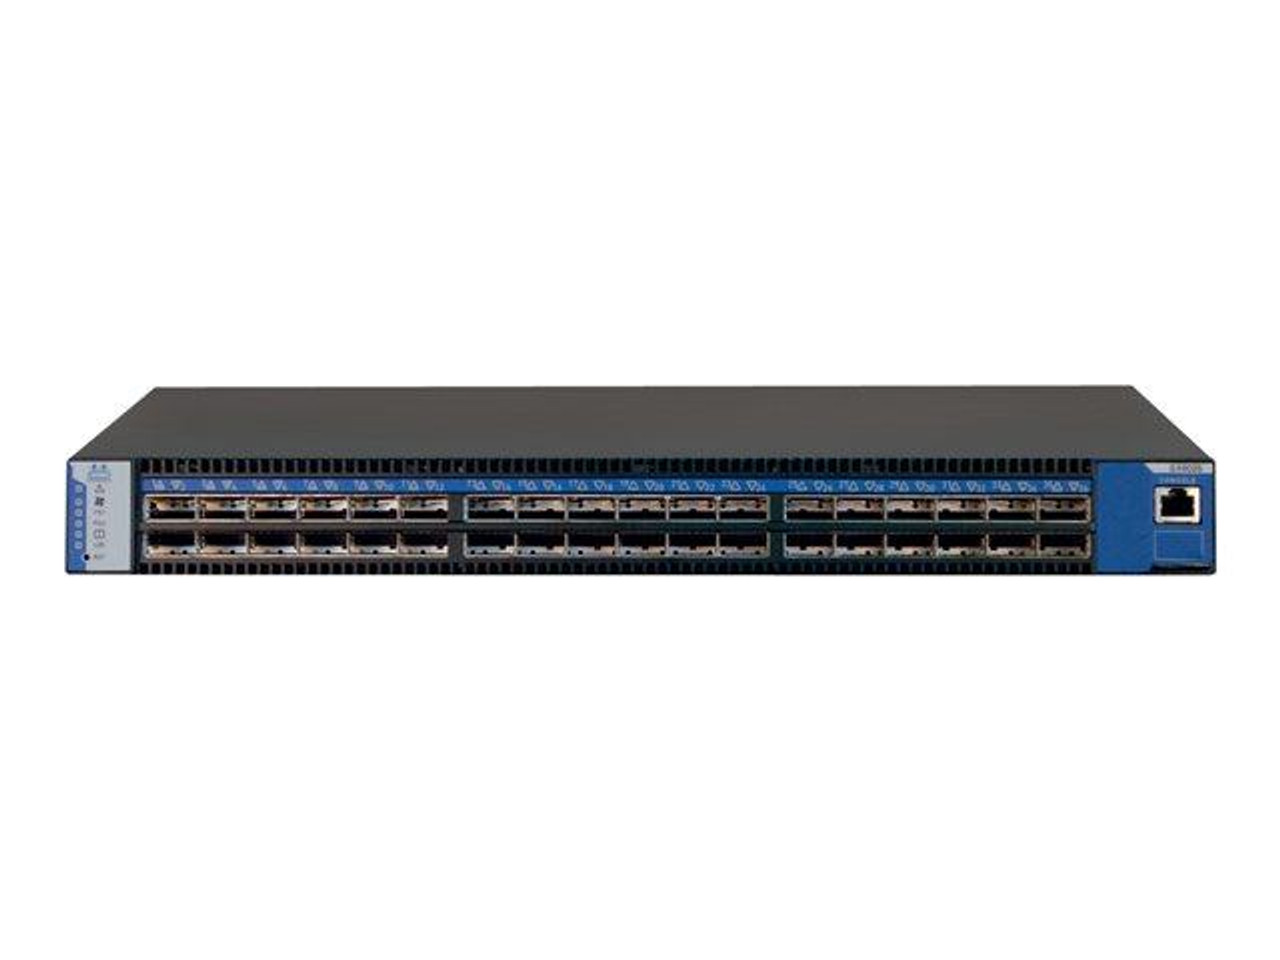 MSX6025F-1BRR Mellanox SwitchX FDR 36x QSFP Ports InfiniBand Switch with 1 Power Supply Side Airflow (Refurbished)